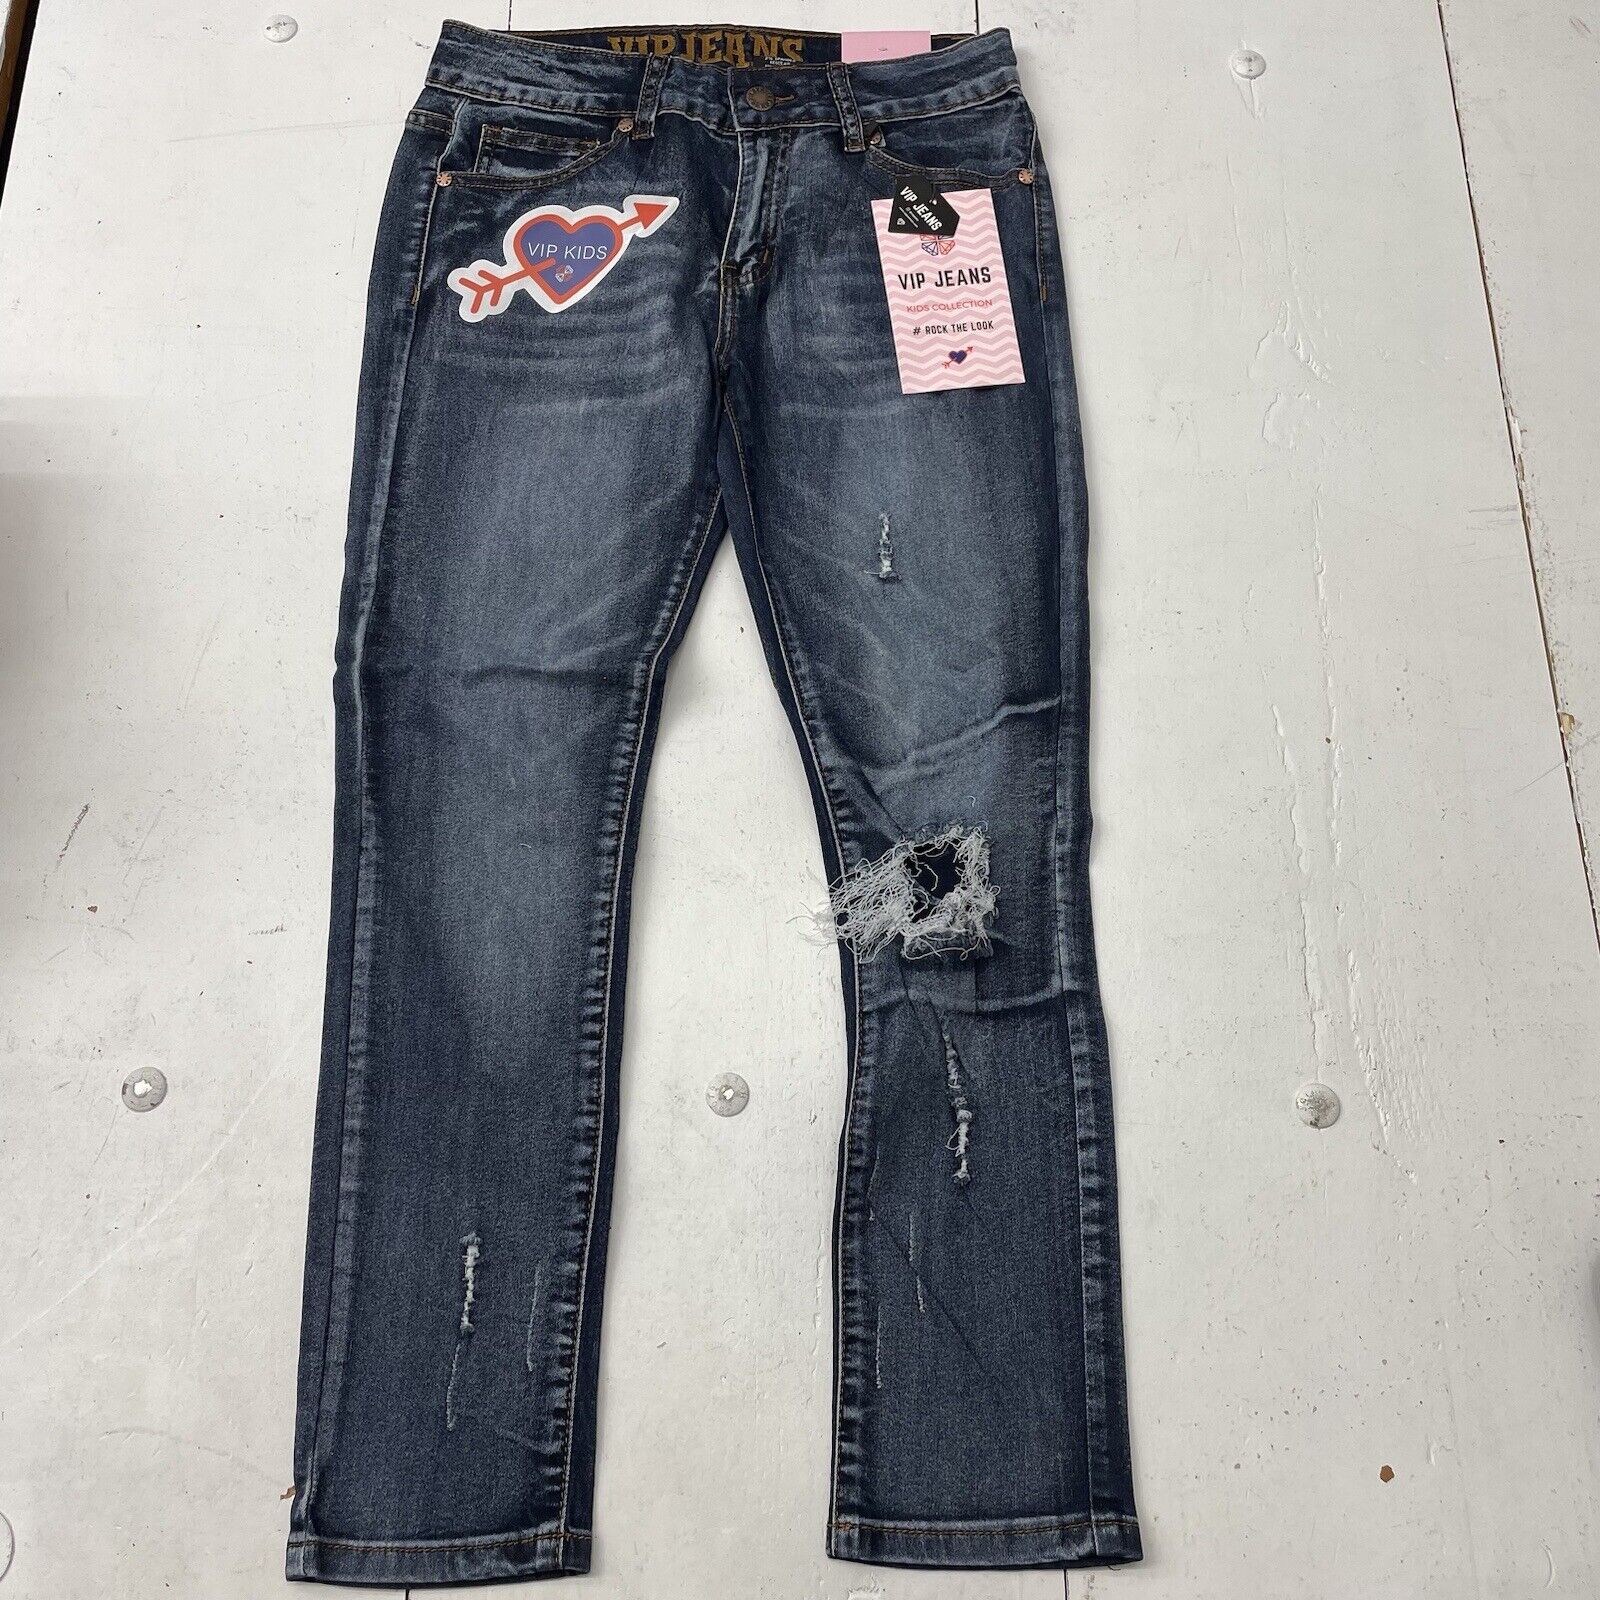 VIP Jeans Kids Collection Distressed Skinny Jeans Stretch Girls Size 14 NEW*